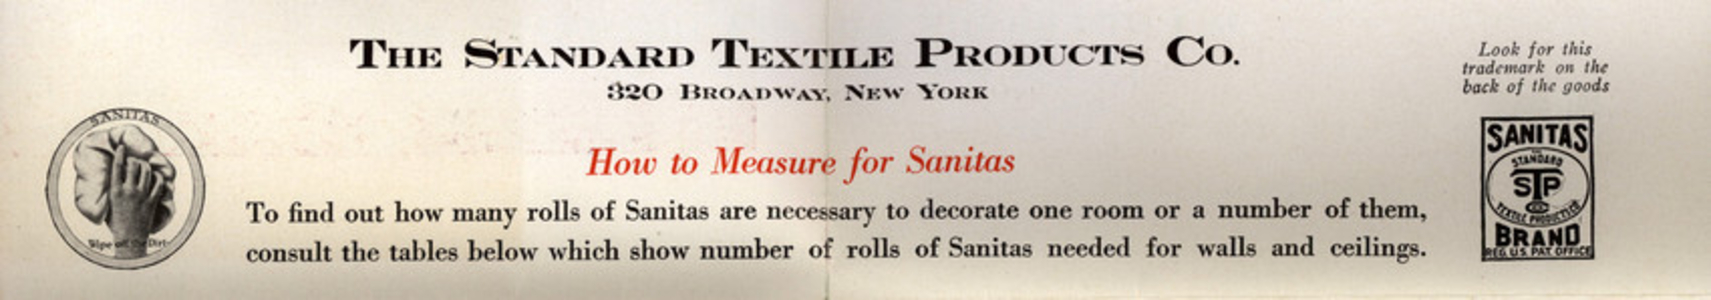 How to measure for Sanitas, Standard Textile Products Co., 320 Broadway, New York, New York